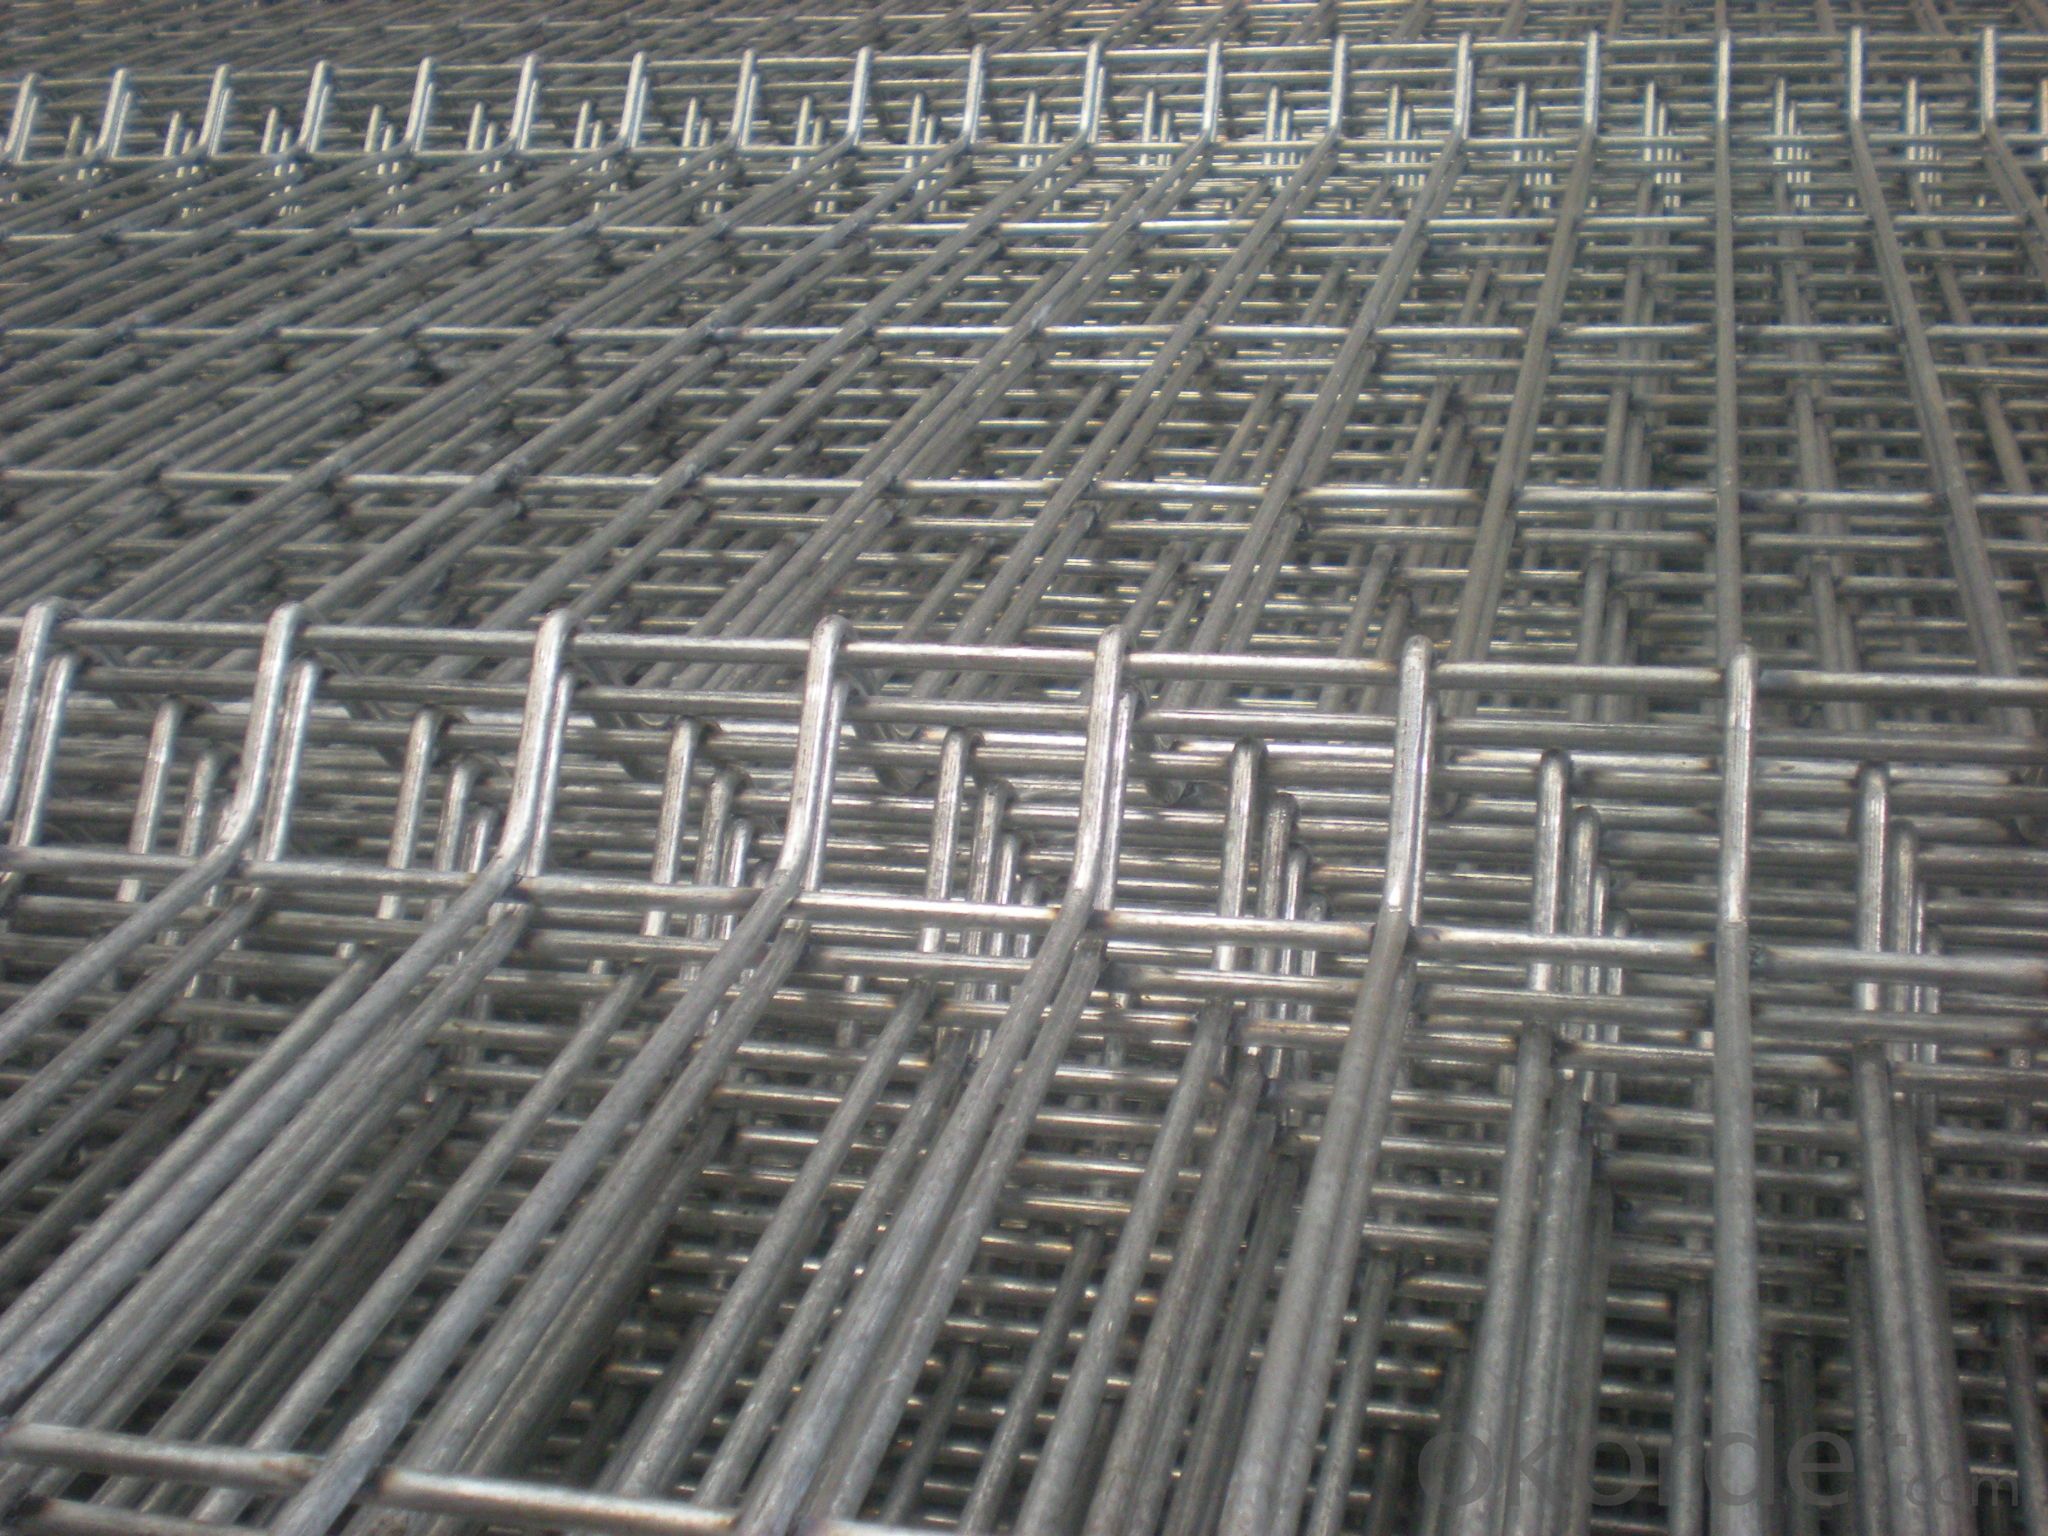 Gavanized Welded Wire Mesh Panel With High Quality